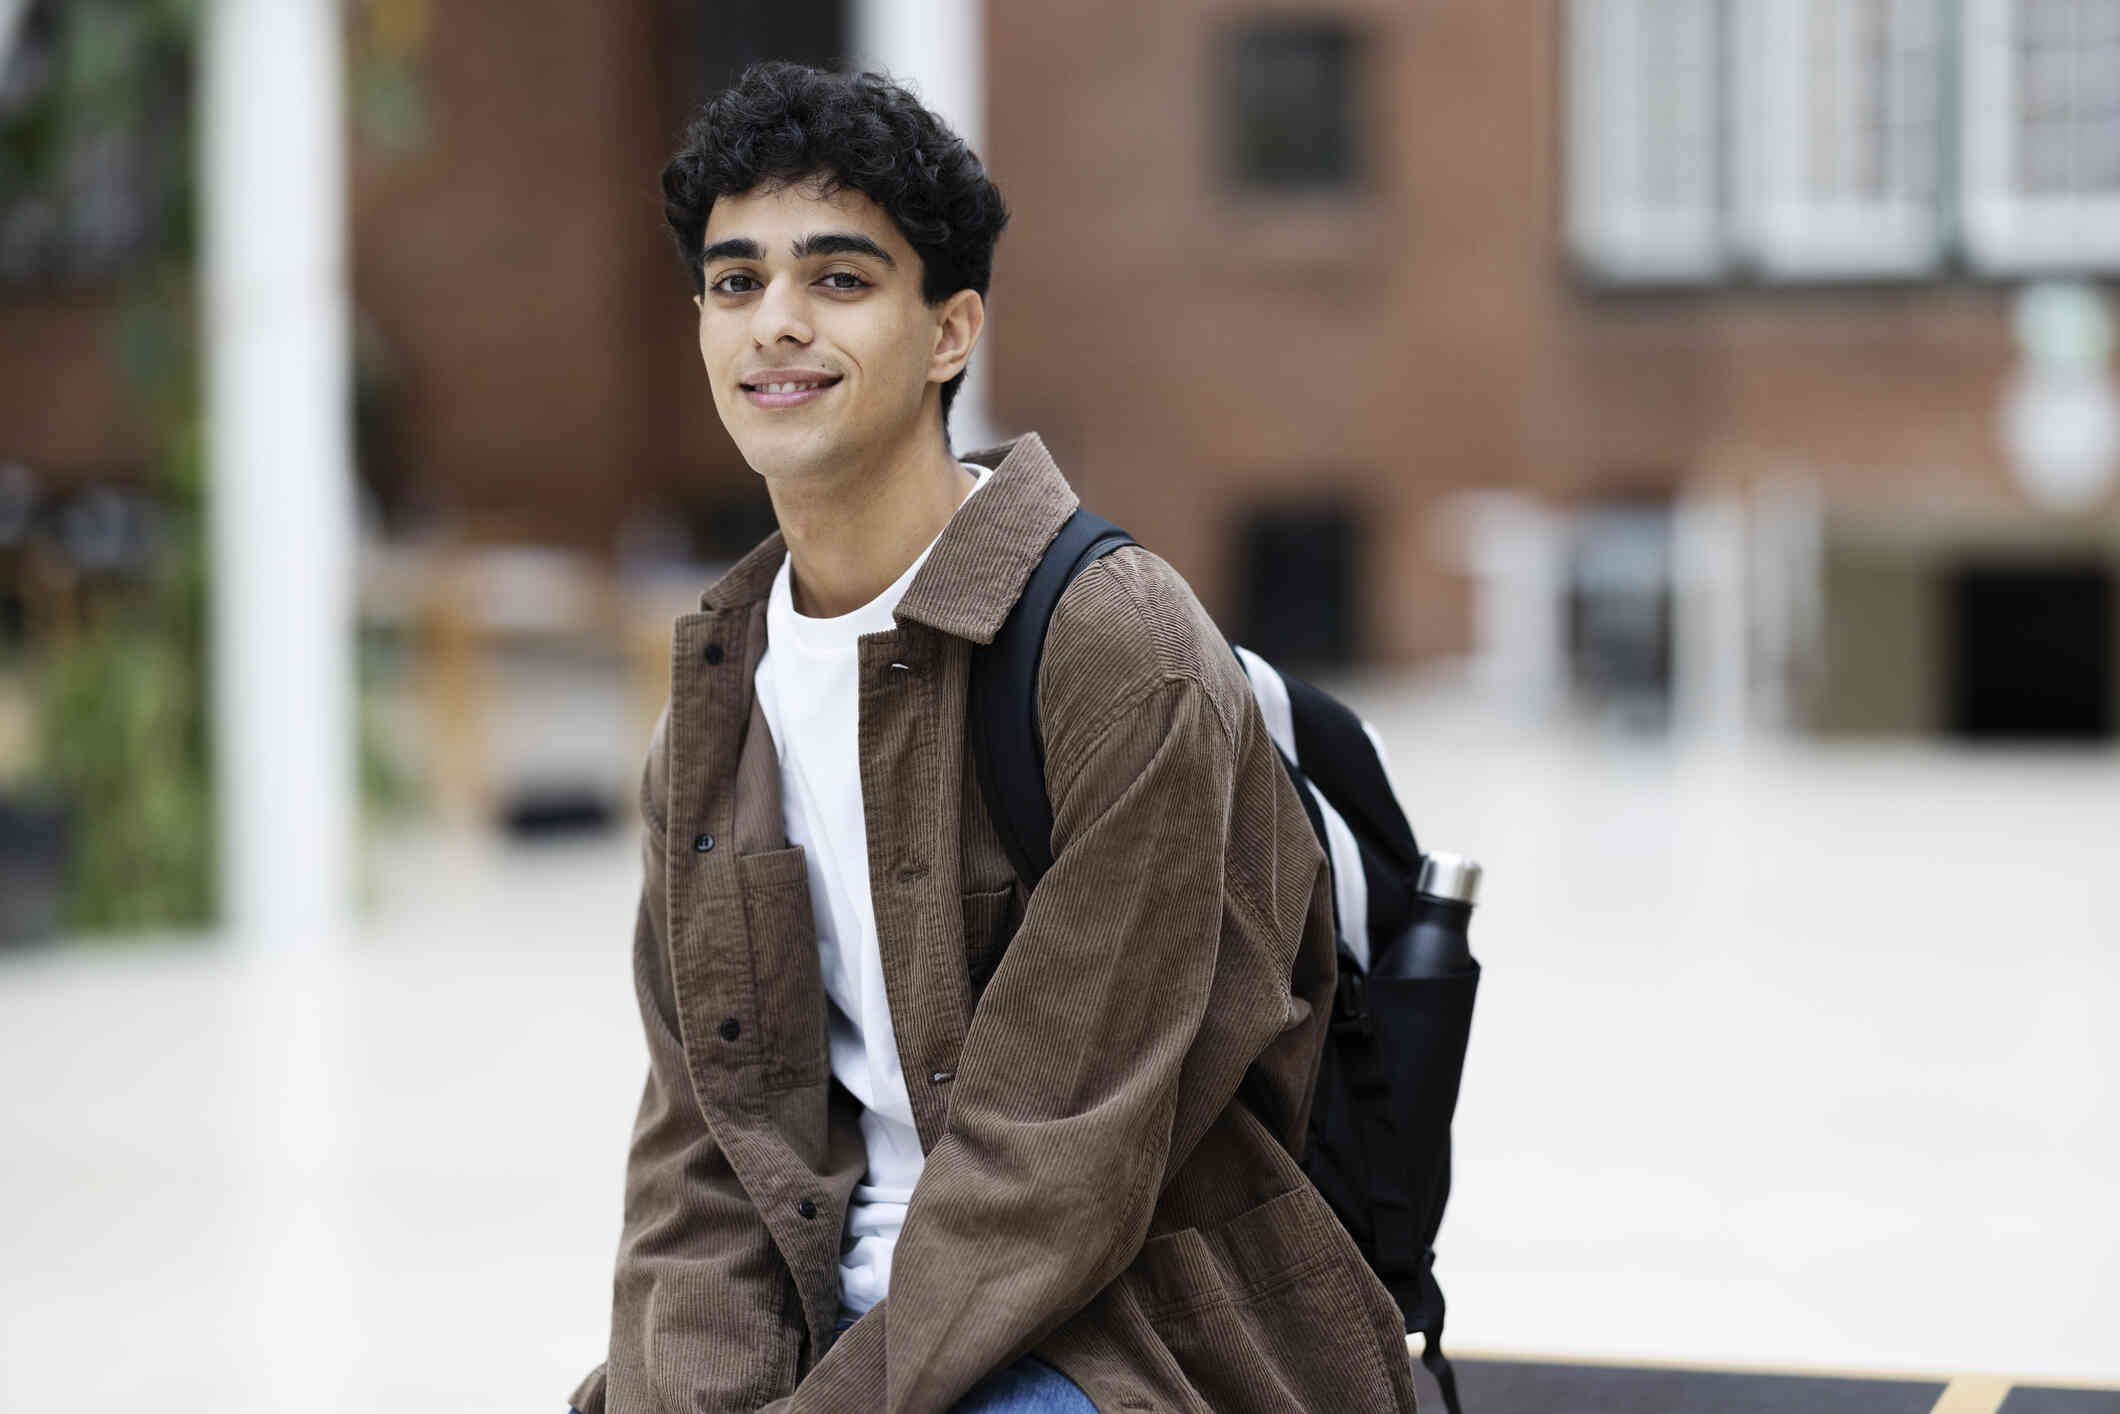 A teen boy in a brown shirt and backpack sits outside on a sunny day and smiles at the camera.